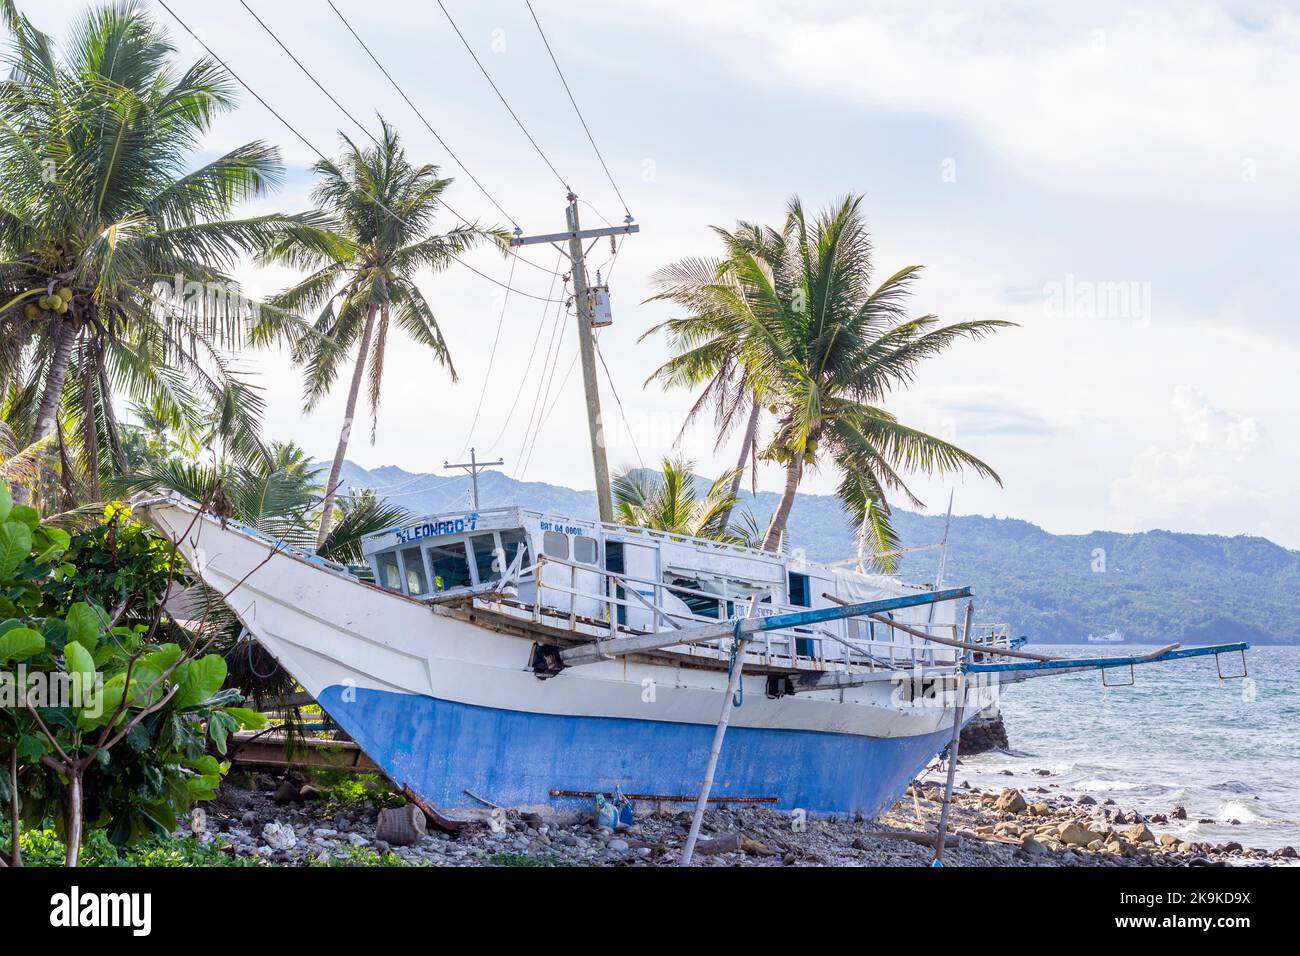 An outrigger boat at the beach in Batangas, Philippines Stock Photo